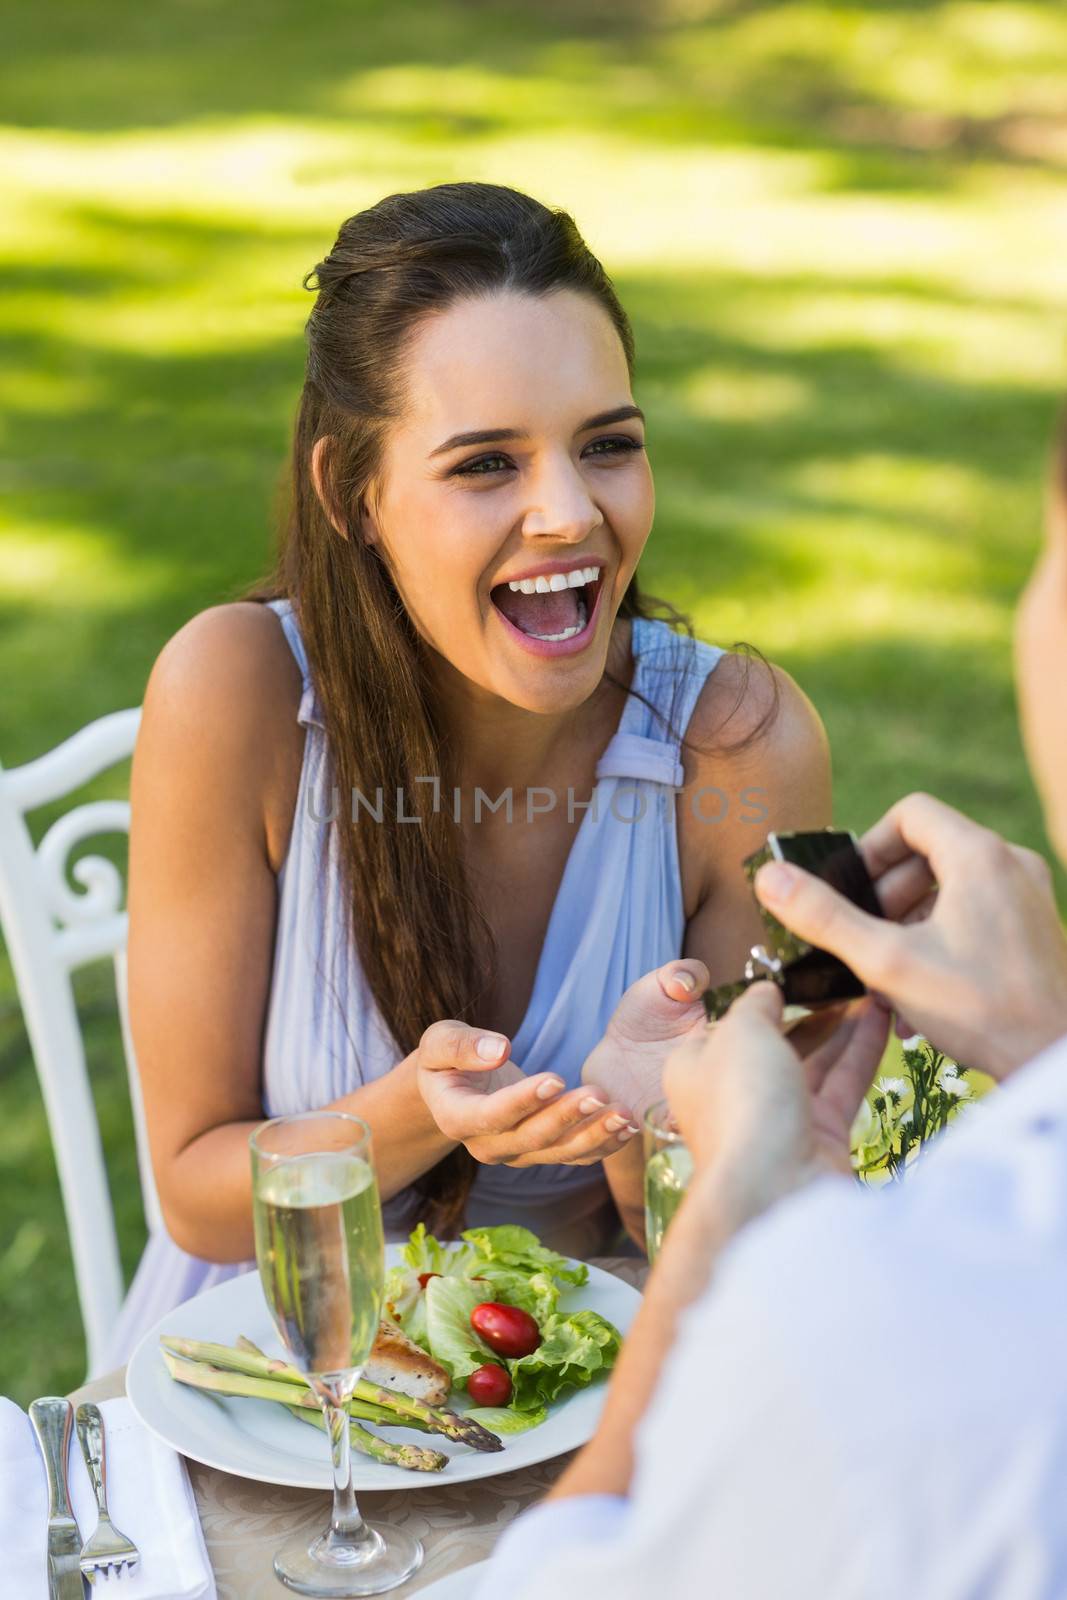 Man proposing a cheerful woman while they have a romantic date at an outdoor caf├®